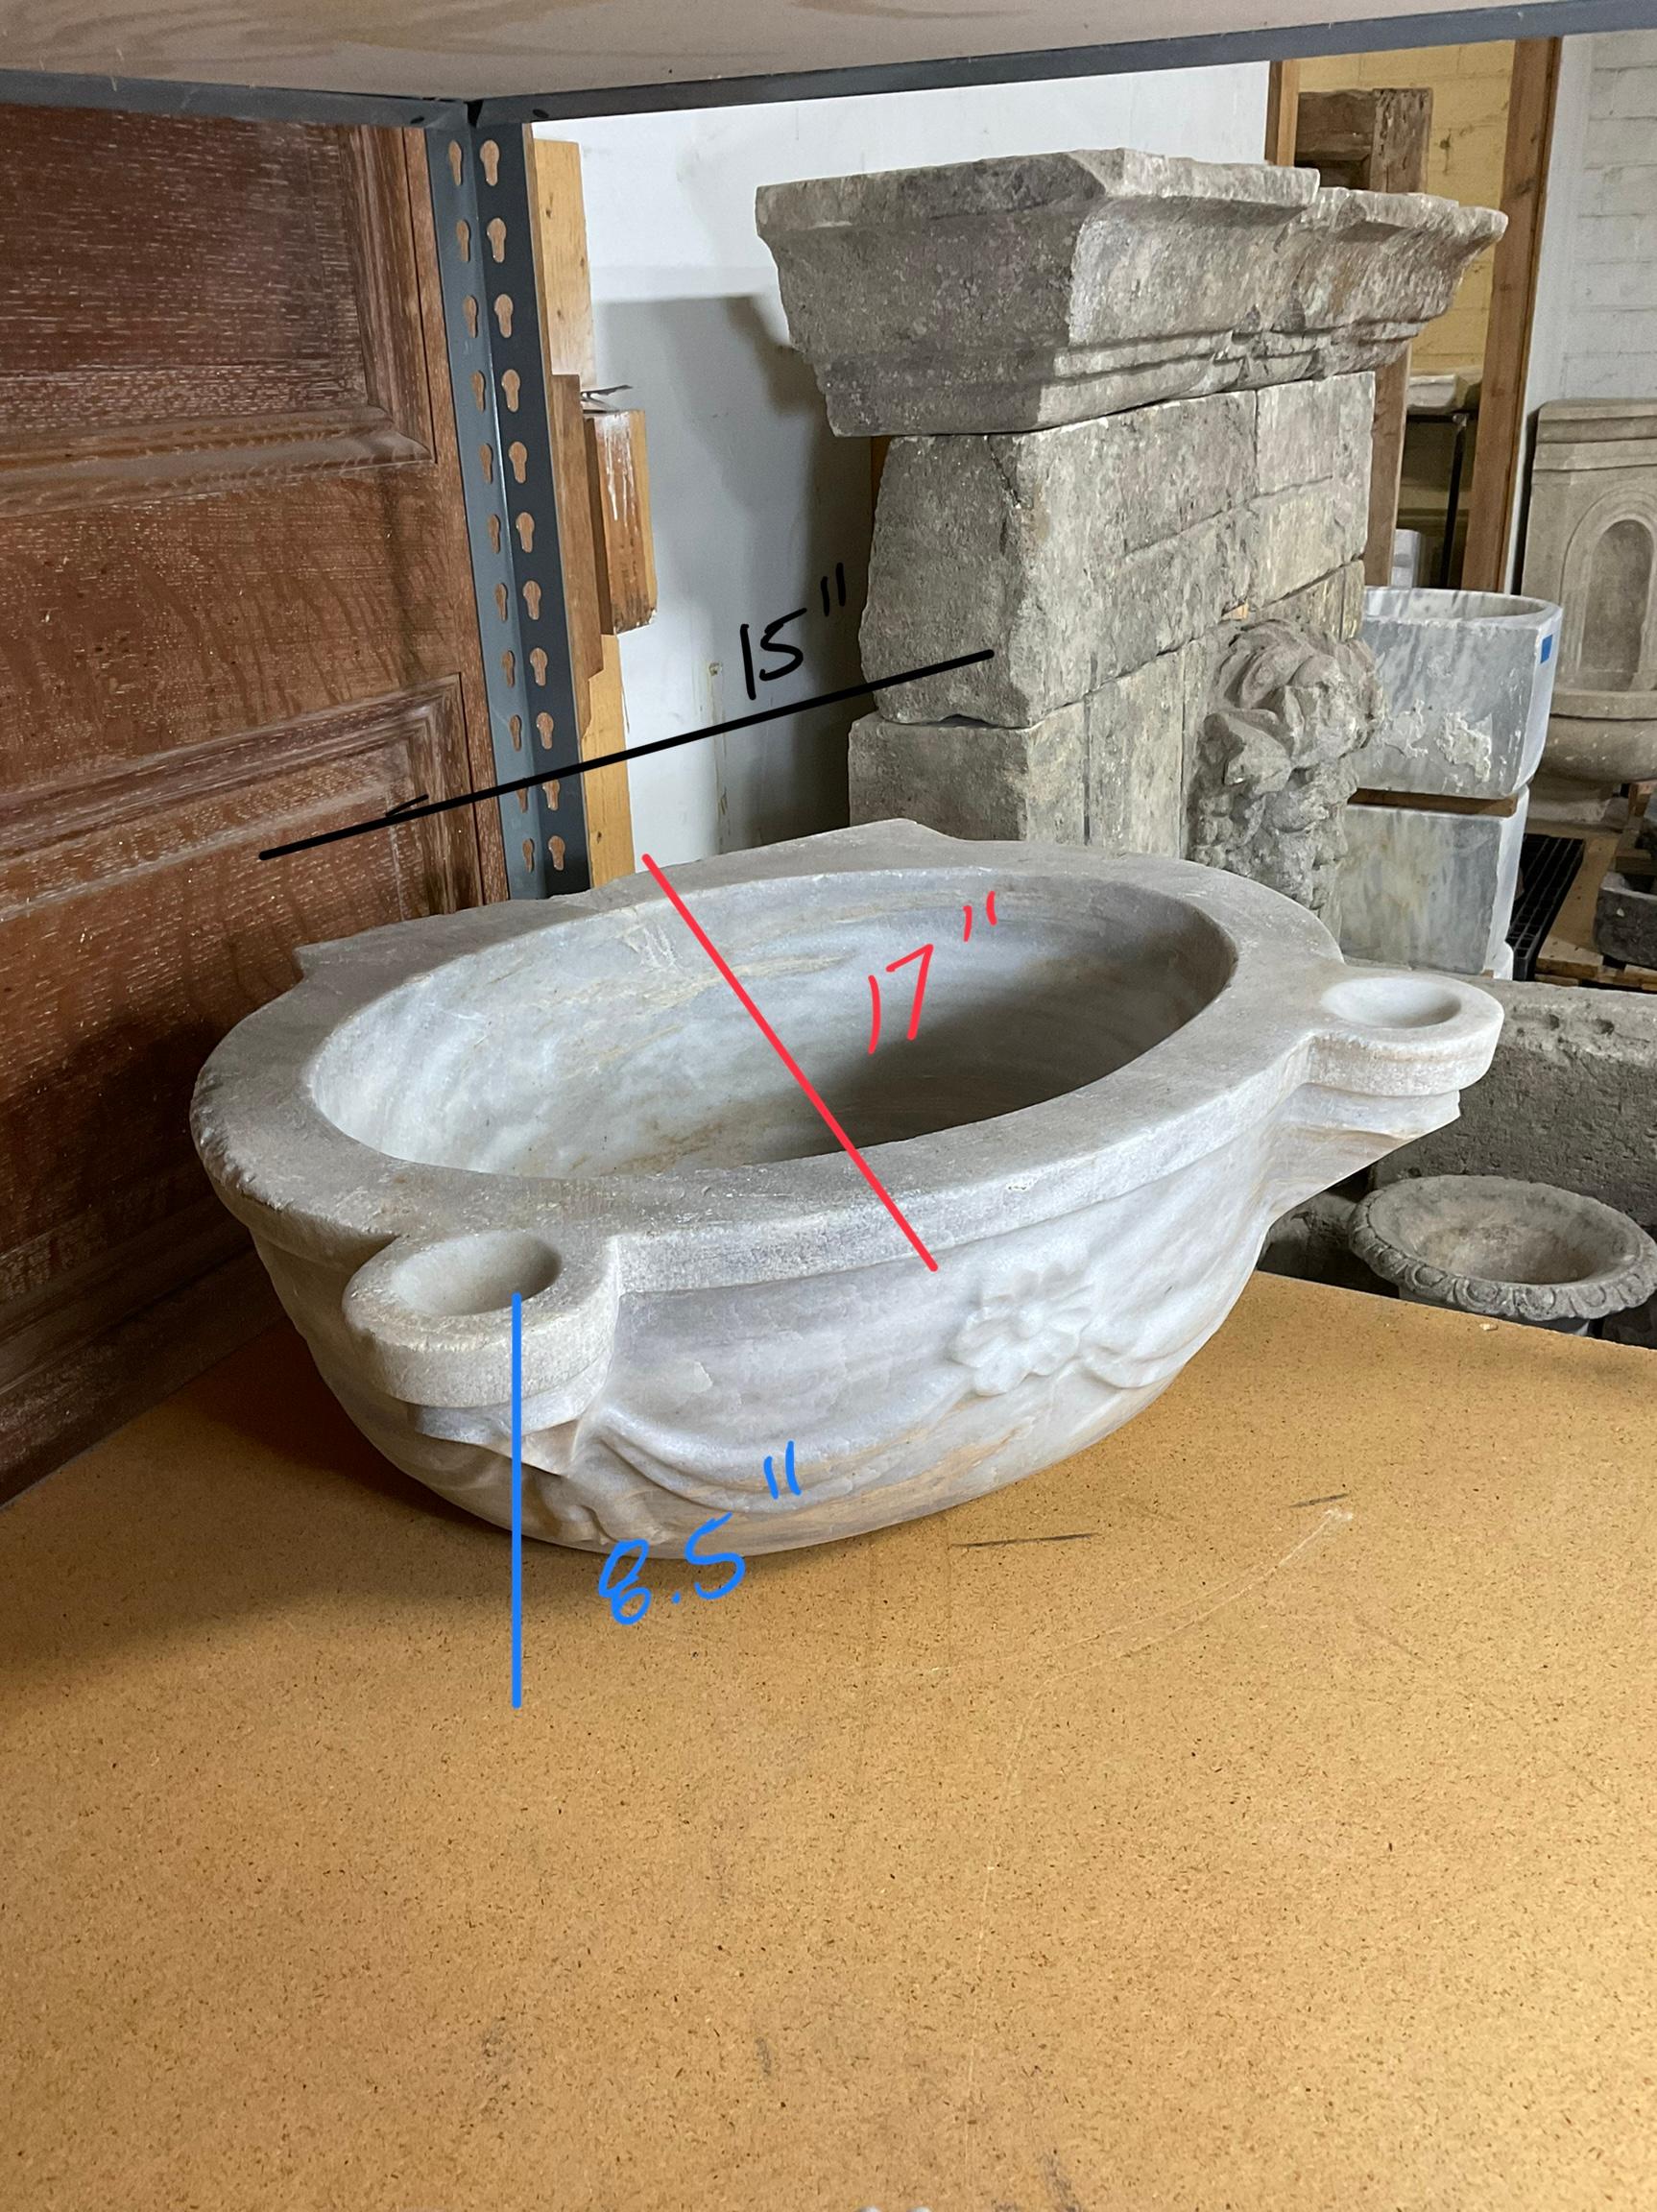 This stunning French White Marble Sink is an exact replica of the ones installed in palaces during the 18th century. Its timeless look and classic design will easily elevate the style of any bathroom.